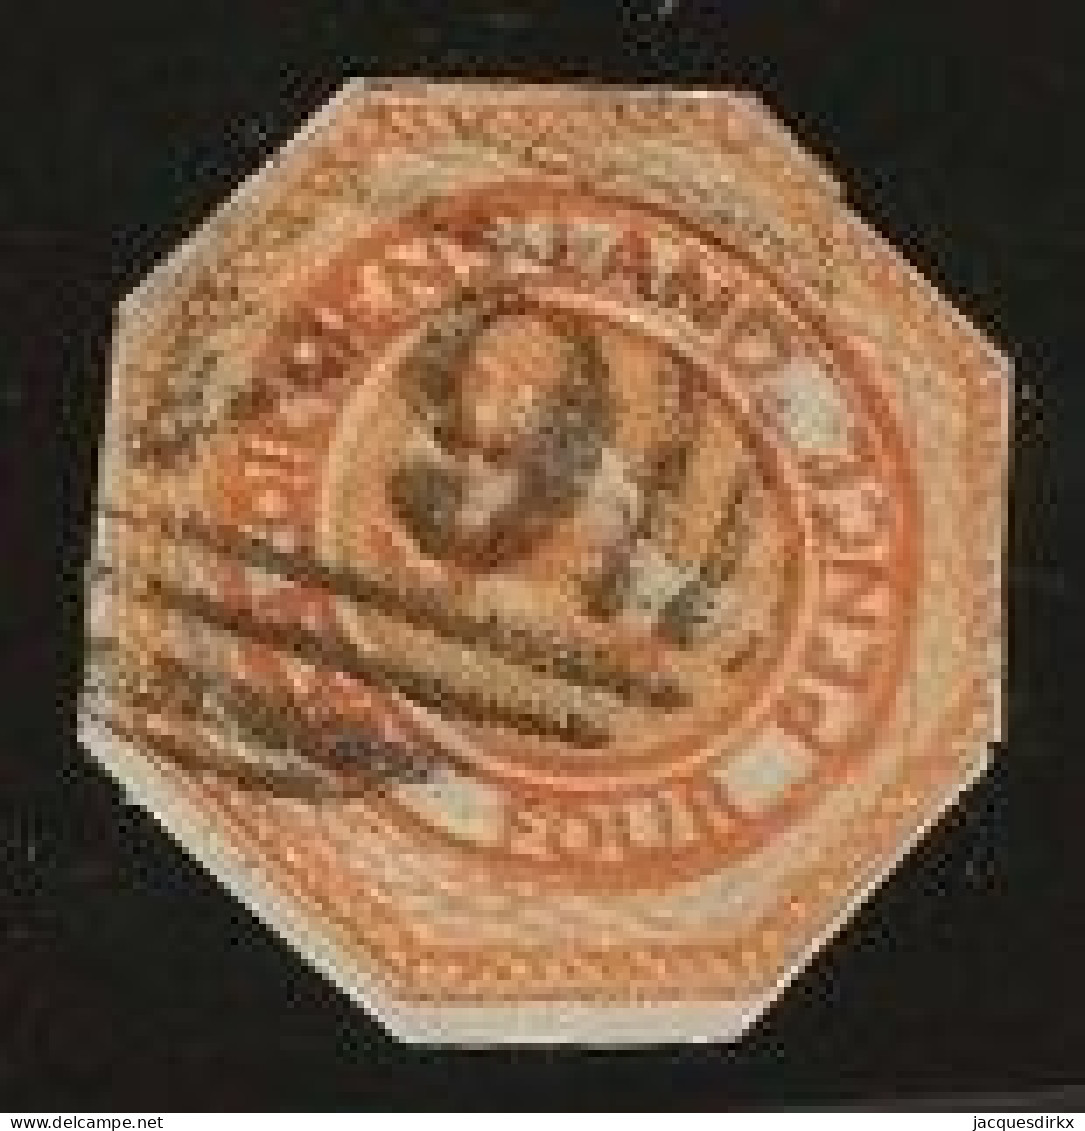 Tasmania       .   SG    .    8   (2 Scans)  .   2nd State    .   O      .     Cancelled - Used Stamps